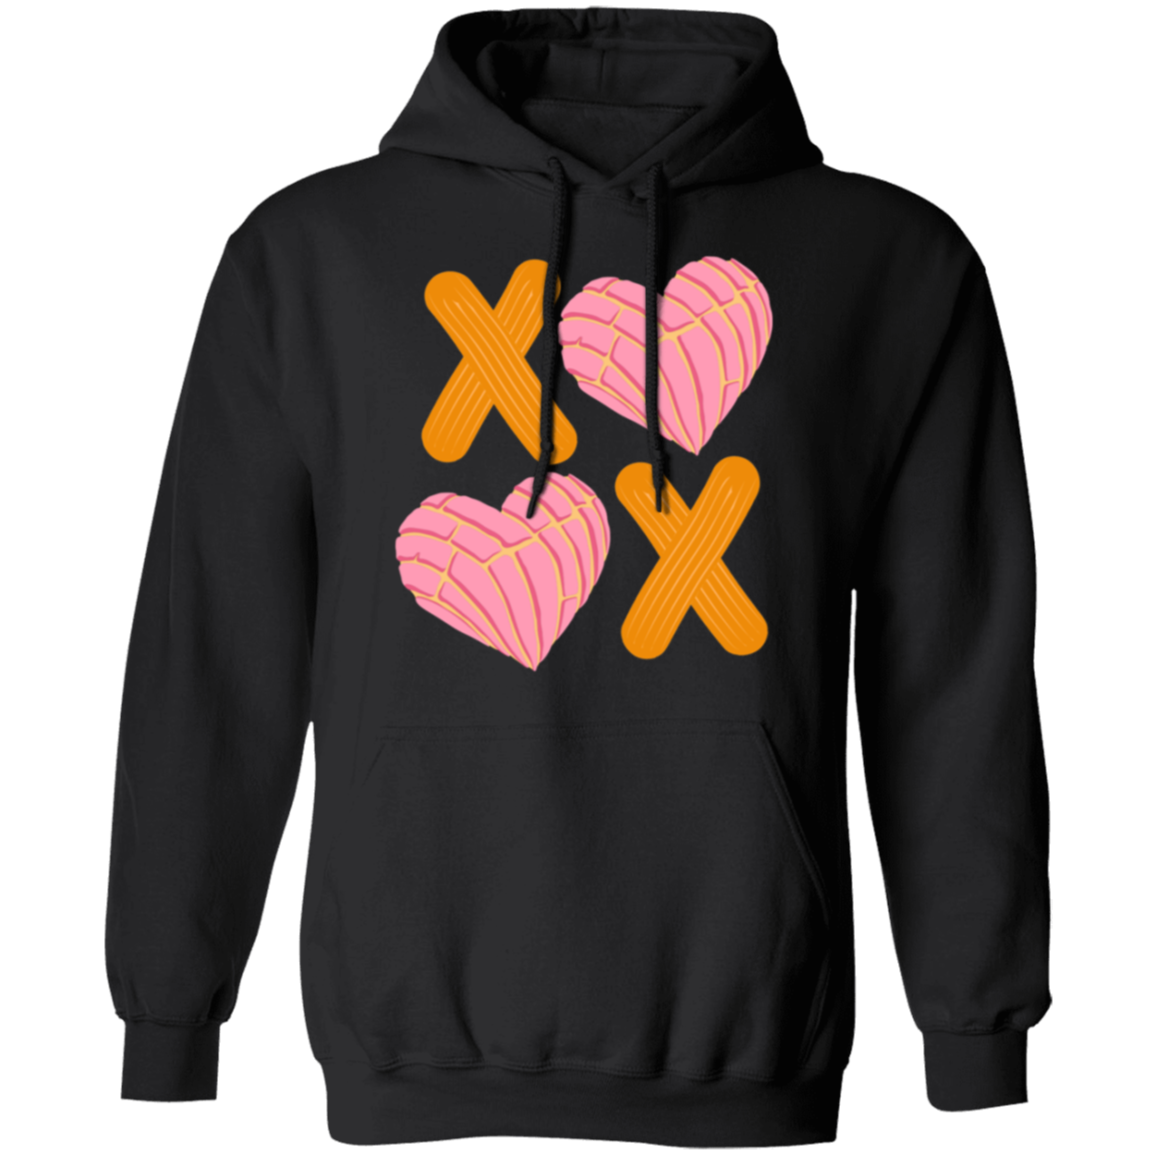 XOXO Pullover Hoodie